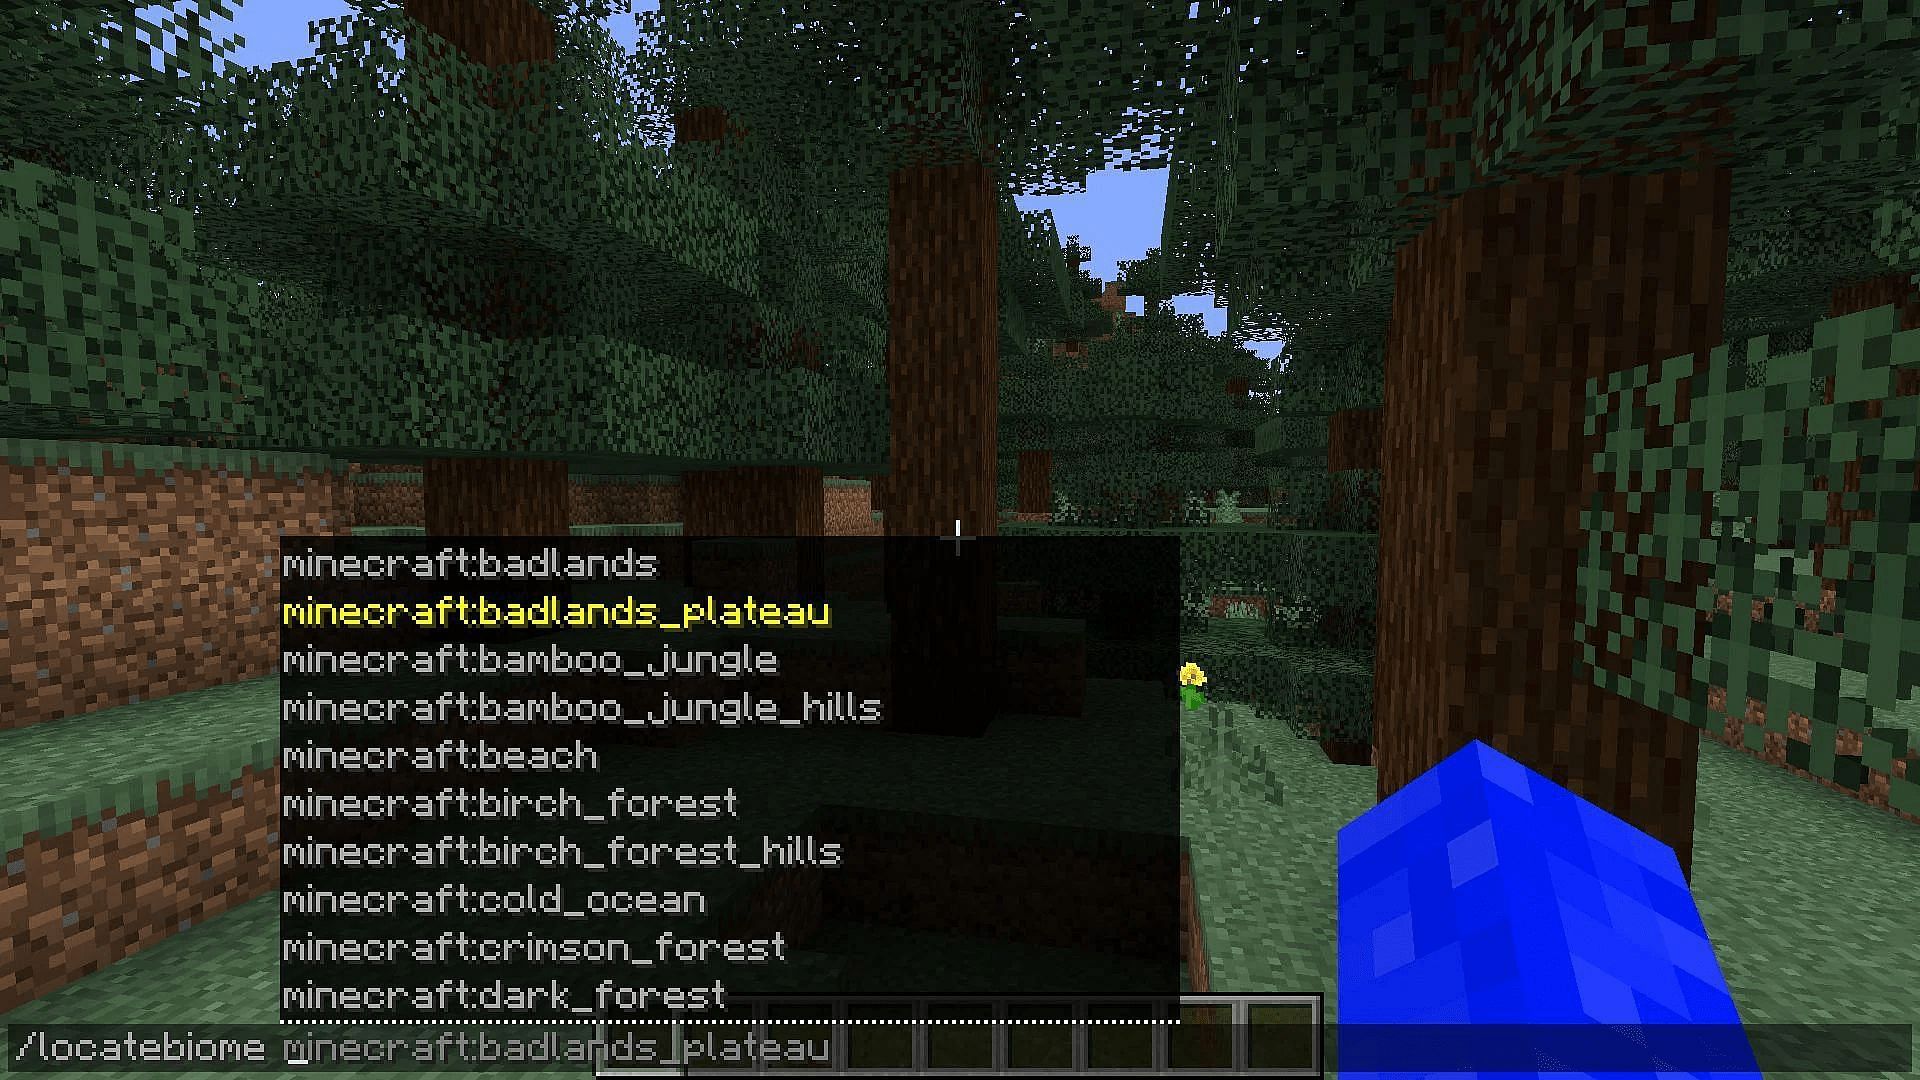 The /locate command can provide Minecraft players with coordinates to villages (Image via Mojang)